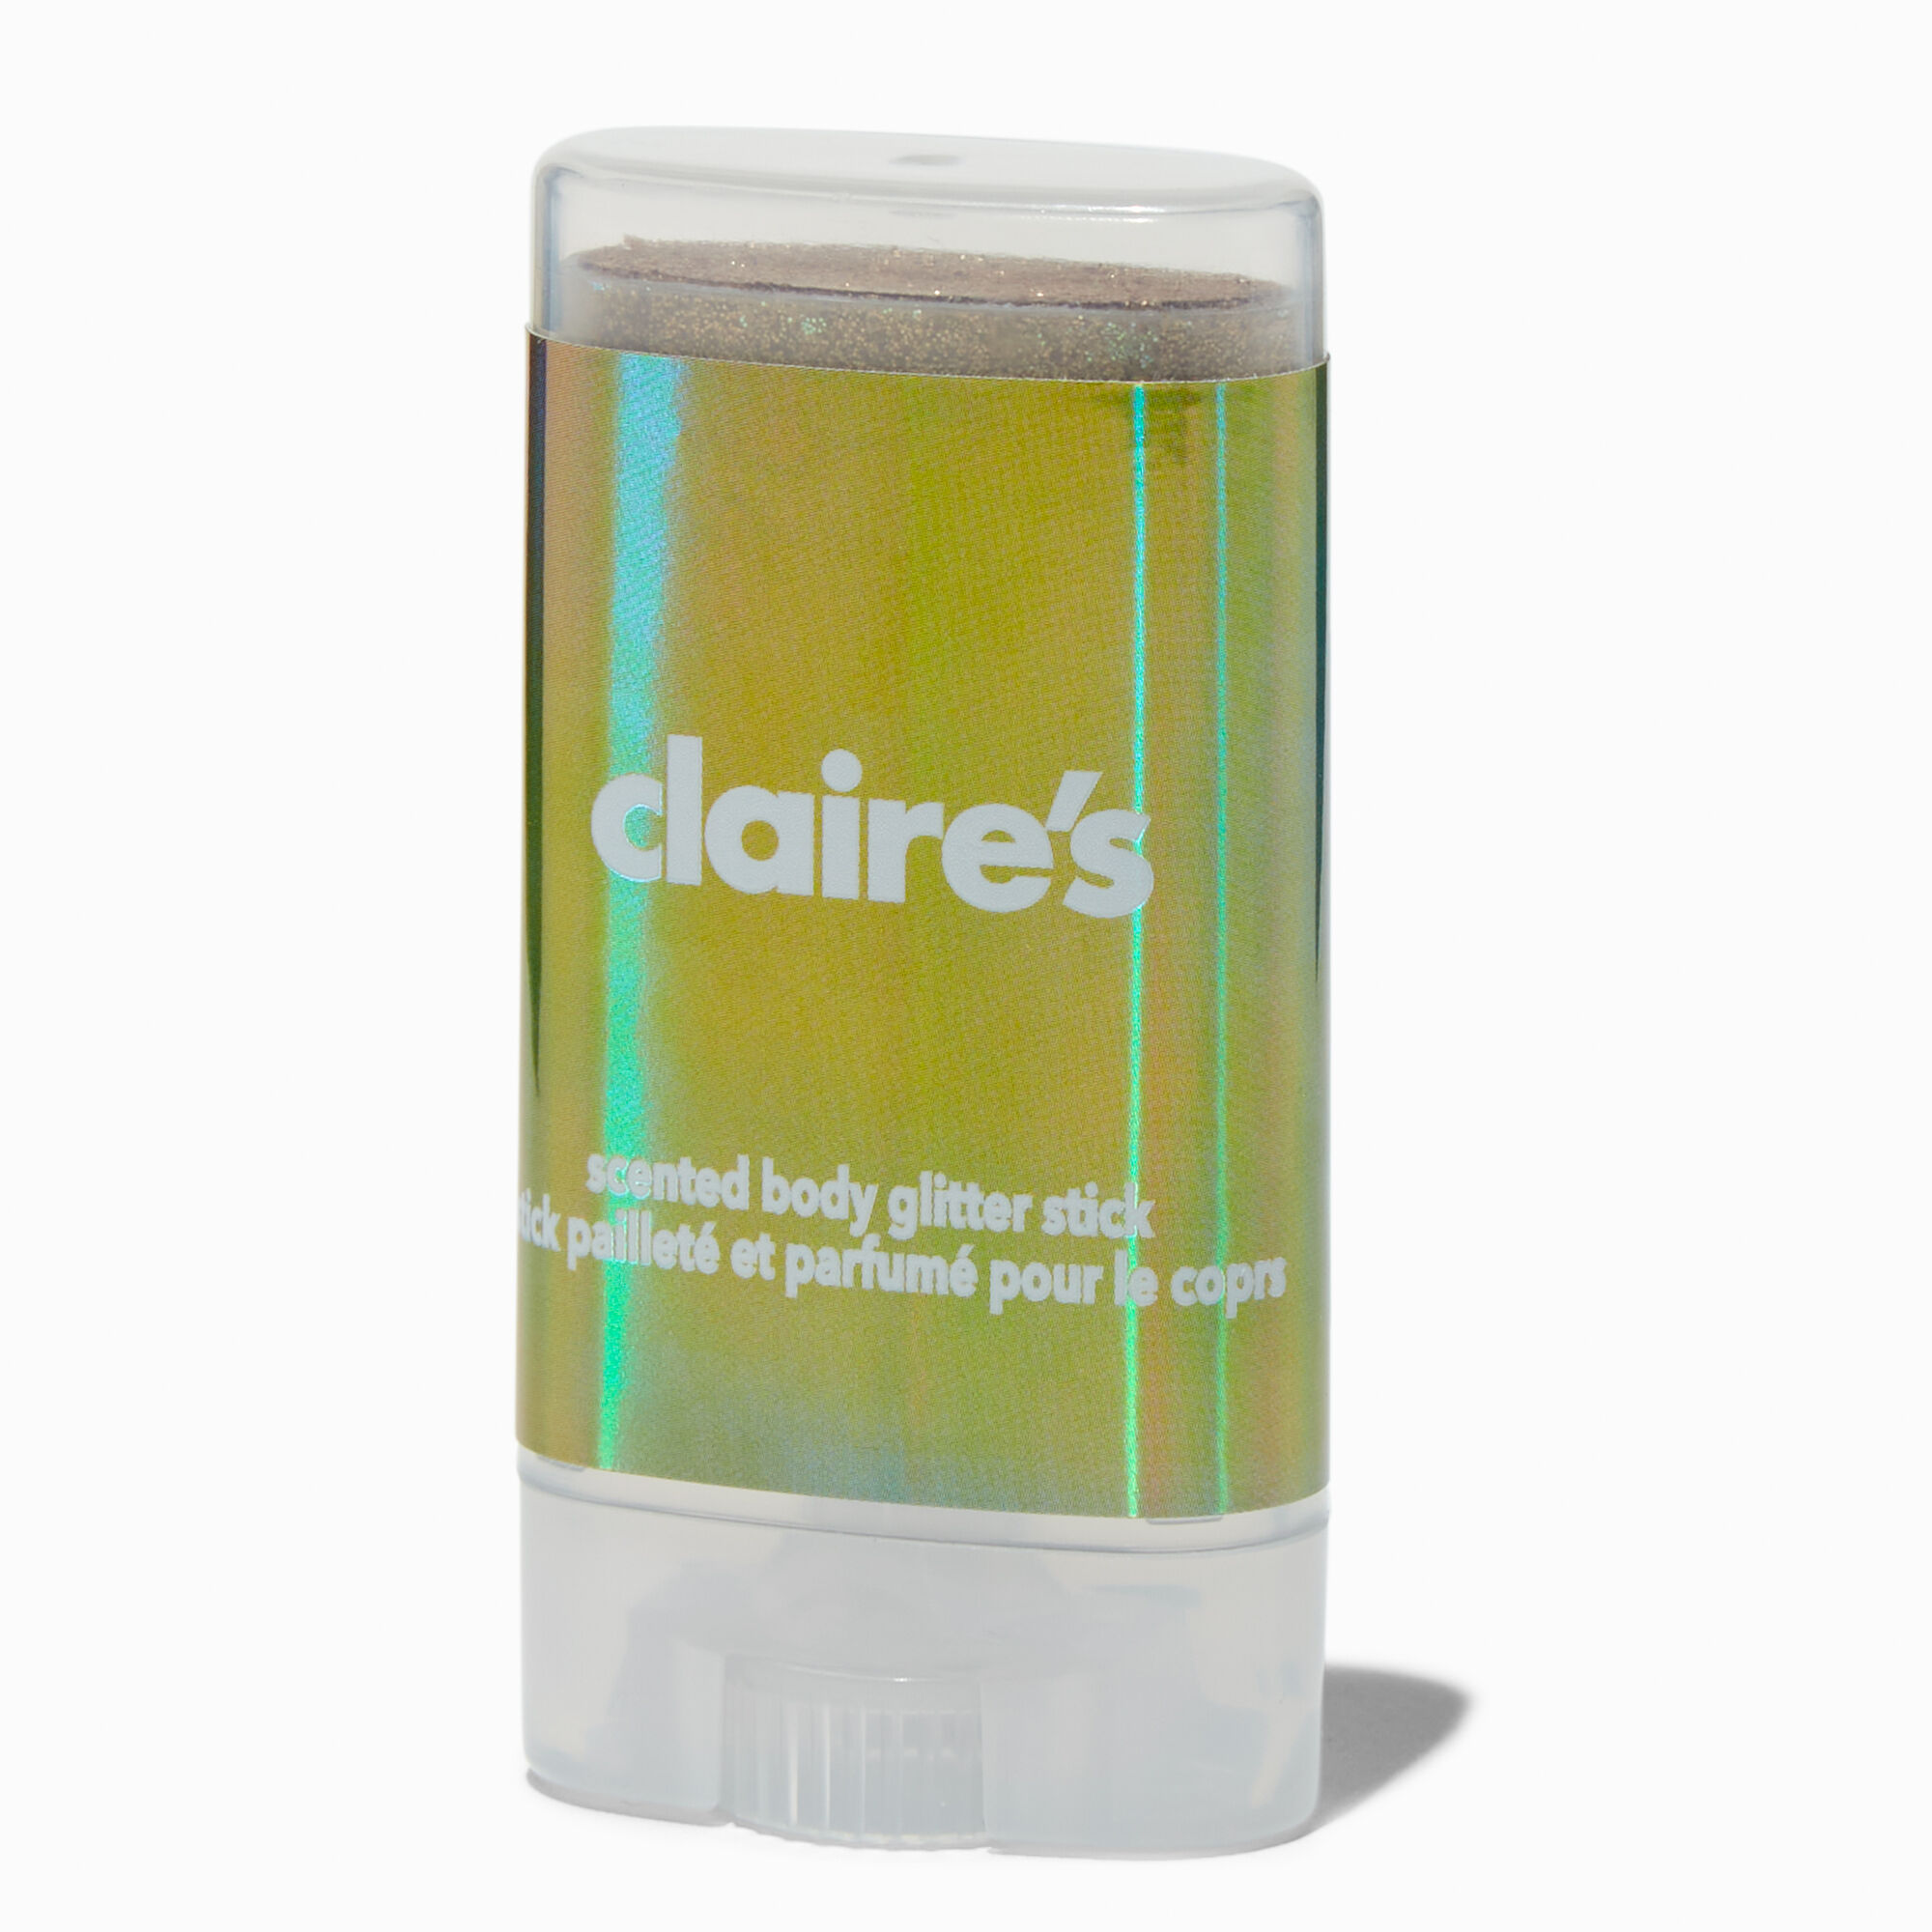 View Claires Scented Body Glitter Stick Gold information